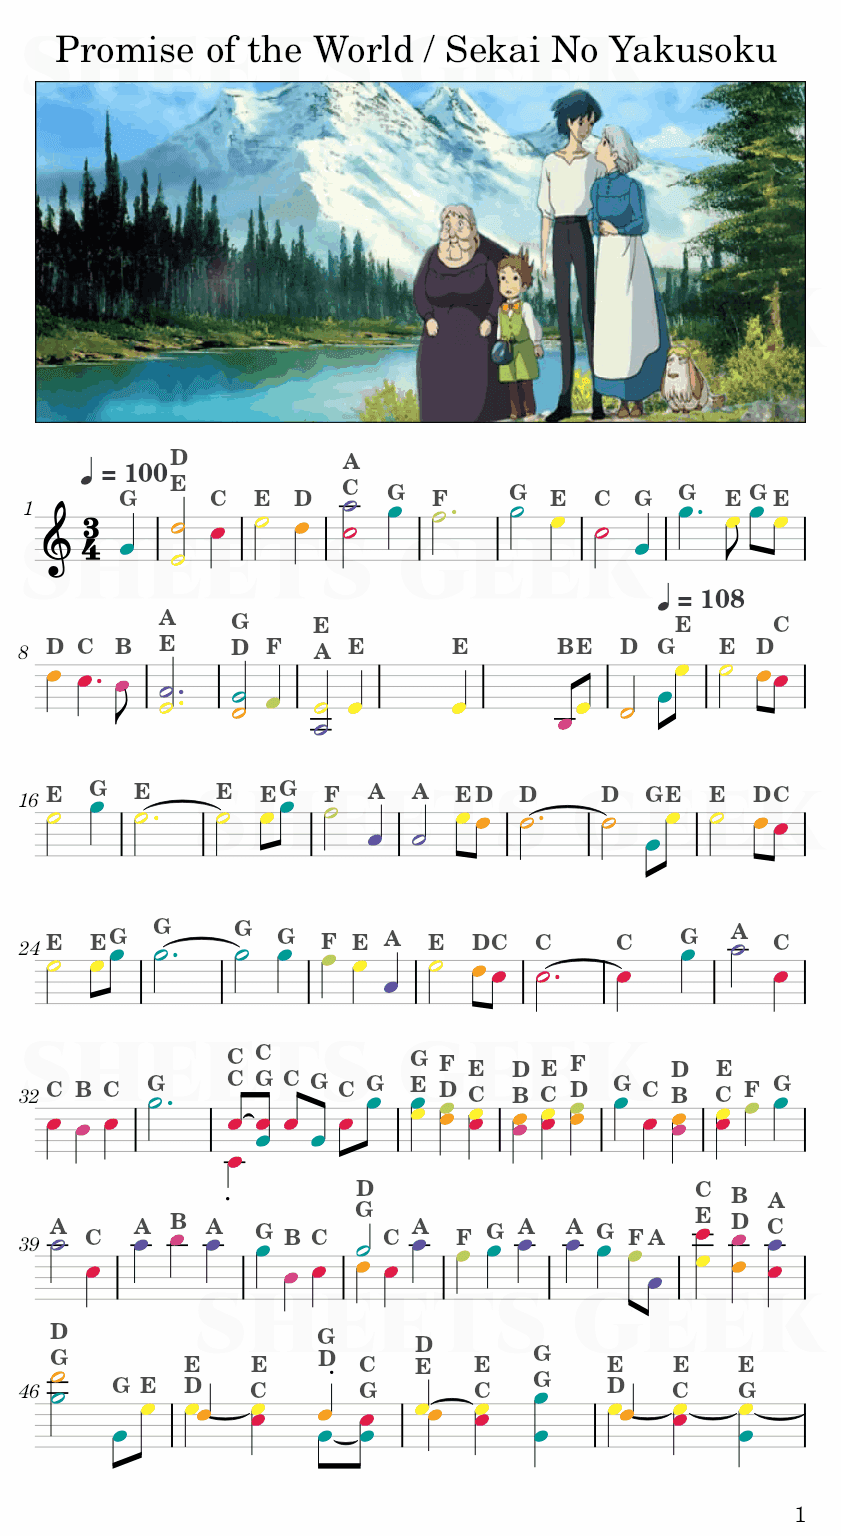 Promise of the World / Sekai No Yakusoku - Howl's Moving Castle Easy Sheet Music Free for piano, keyboard, flute, violin, sax, cello page 1